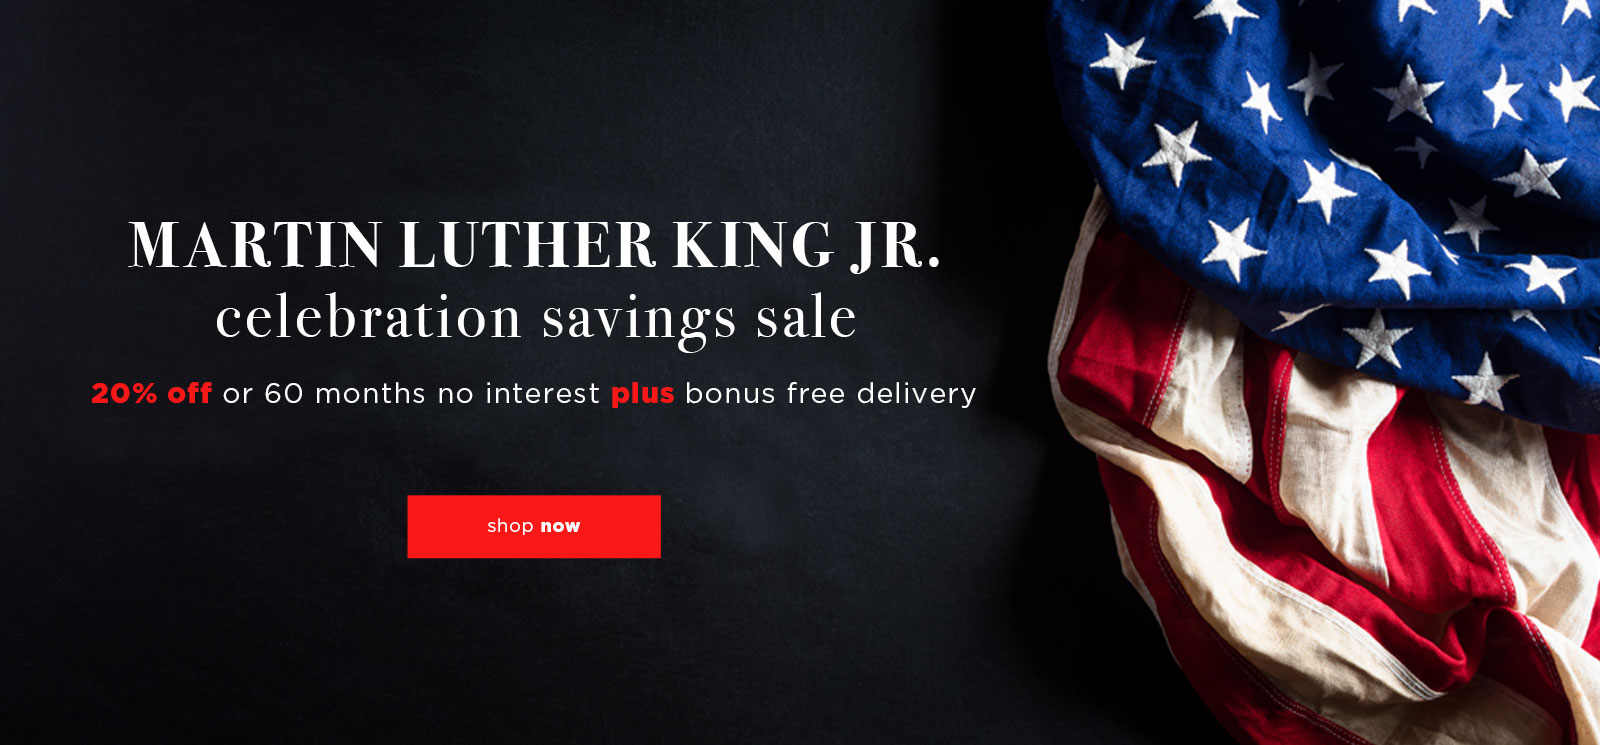 MLK Sale - 20% Off or 60 Months No Interest Plus Free Delivery